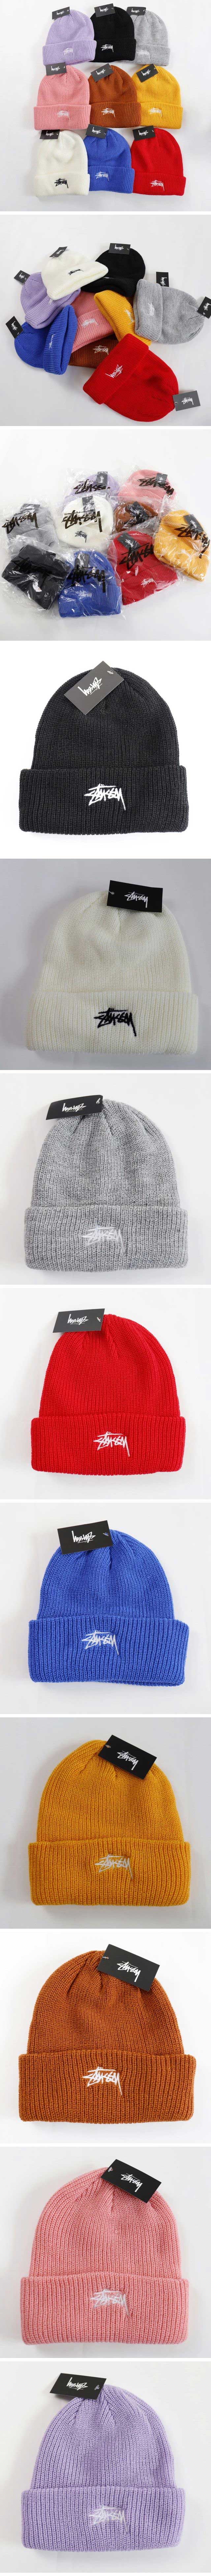 Stussy Embroidery Logo Beanie Knit Cap ステューシー ロゴ ビーニー ニットキャップ